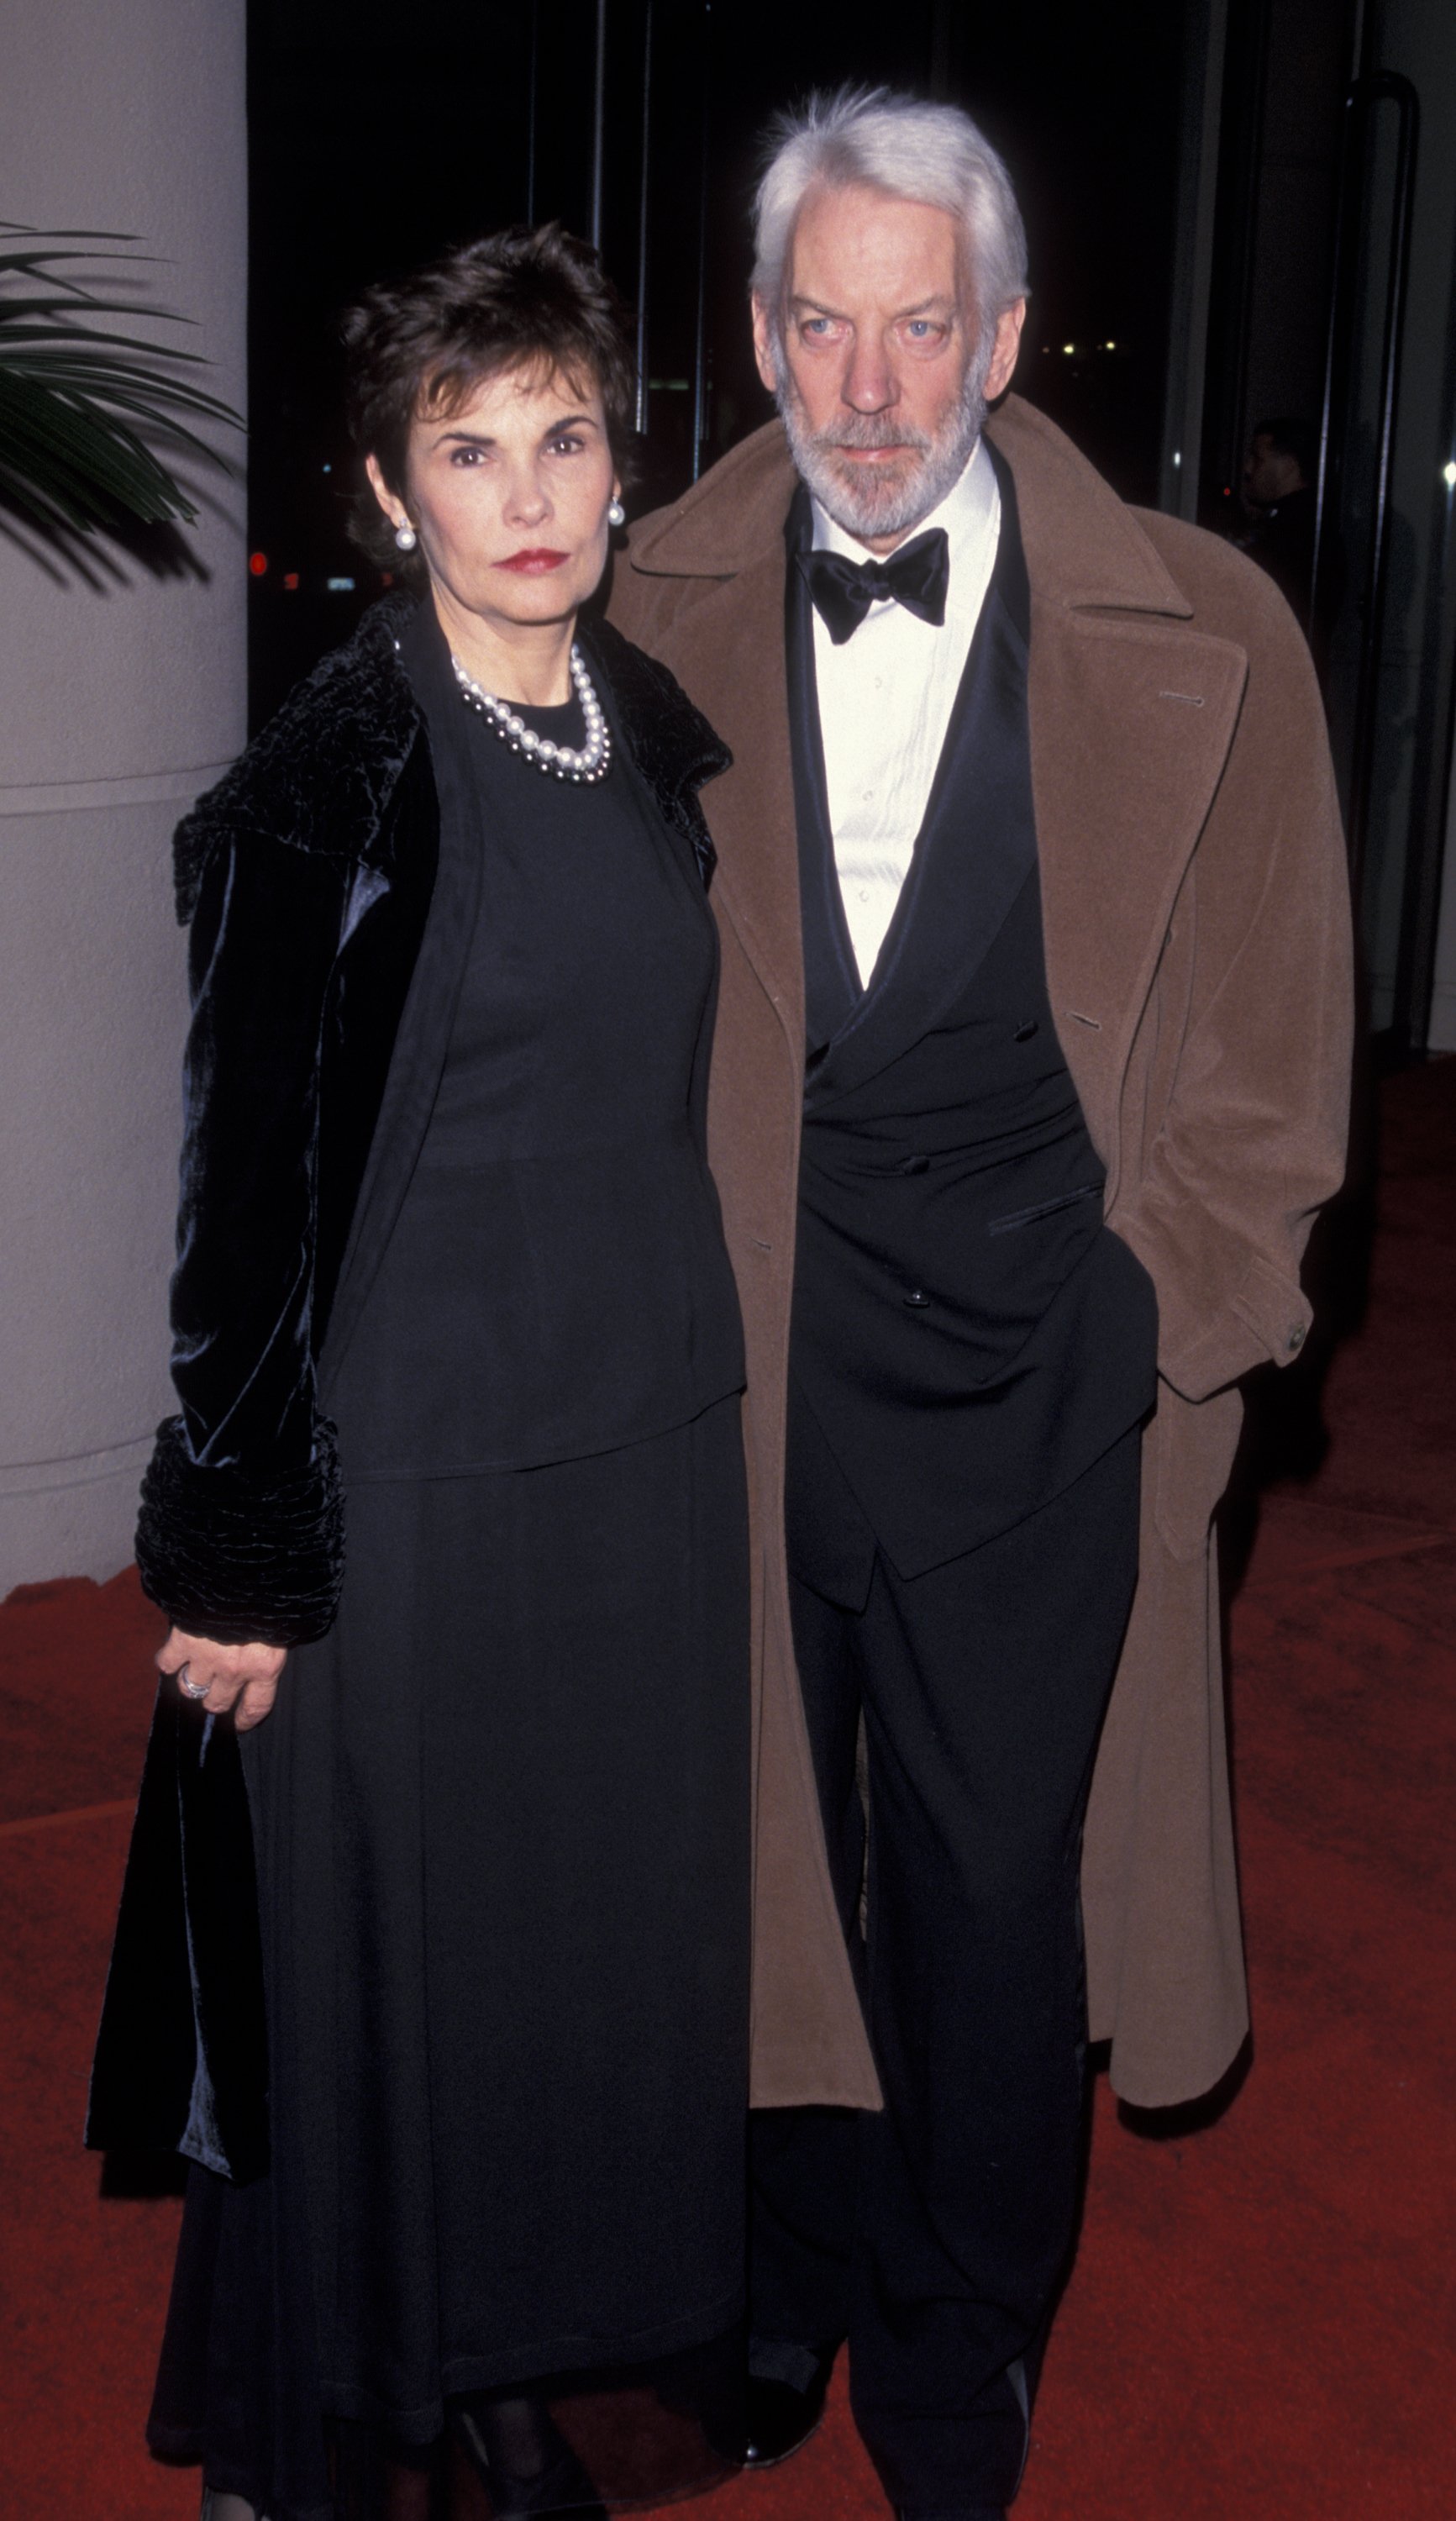 Francine Racette and Donald Sutherland attend 27th Annual American Film Institute Lifetime Achievement Awards on February 18, 1999 at the Beverly Hilton Hotel in Beverly Hills, California | Source: Getty Images